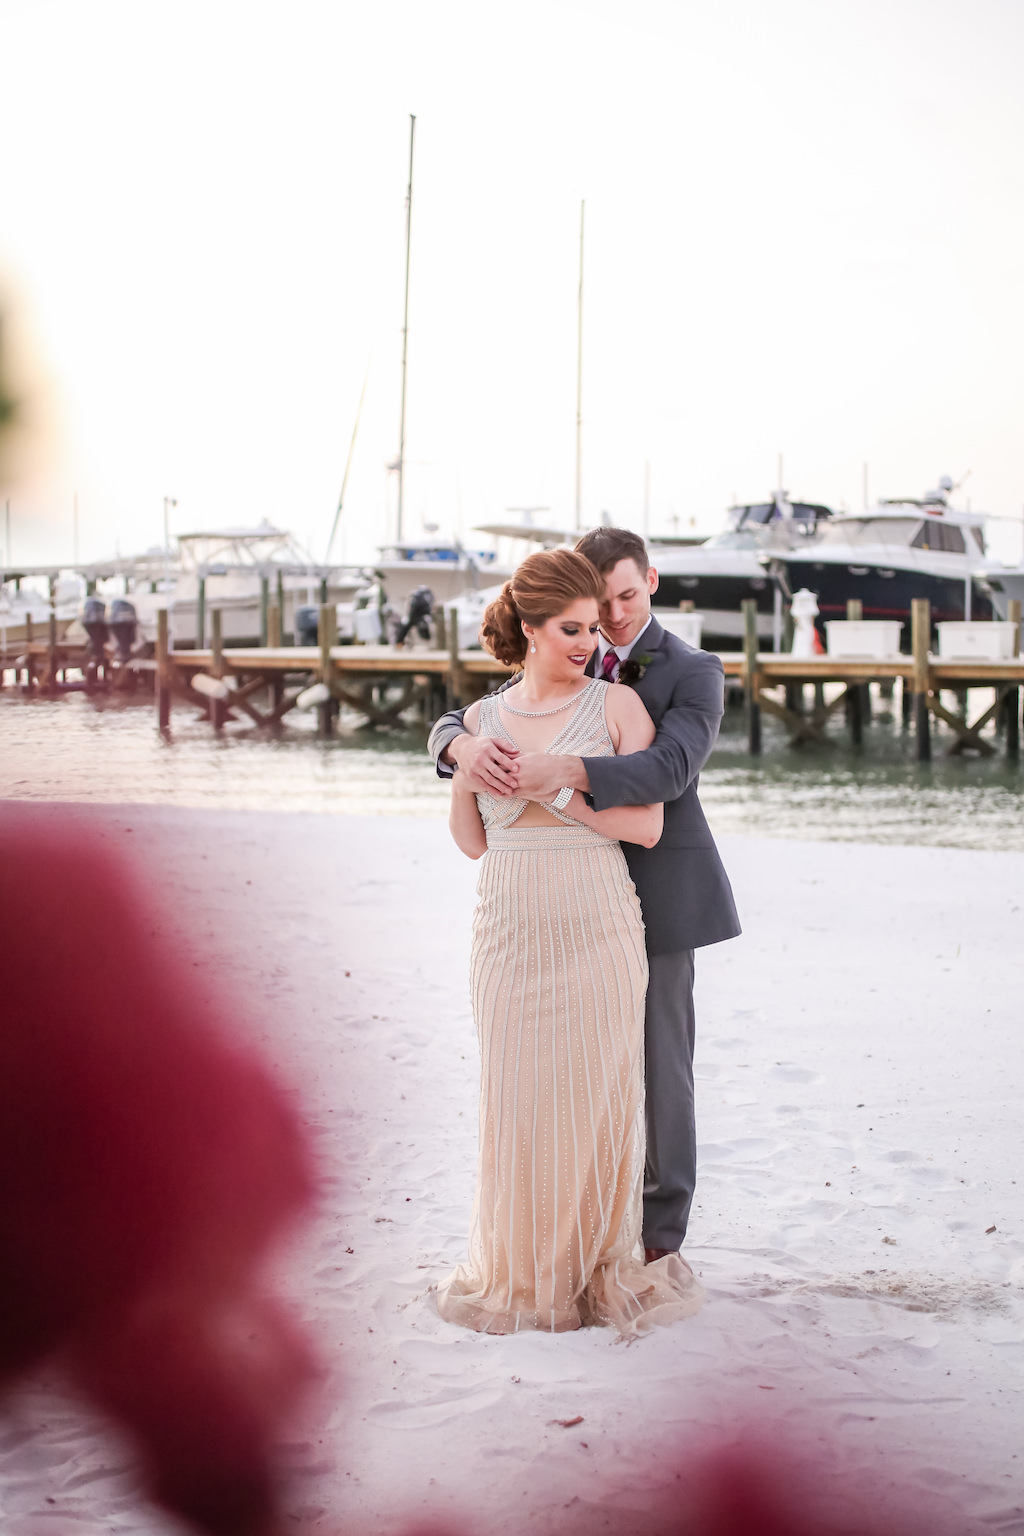 Outdoor Beach Wedding Portrait, Bride in Jeweled Ivory Open Backed Dress, Groom in Gray Suit | Tampa Bay Waterfront Wedding Venue Isla Del Sol Yacht and Country Club | Dress Shop Truly Forever Bridal | Menswear Sacino's Formalwear | Hair and Makeup Michele Renee The Studio | Photographer Lifelong Studios Photography